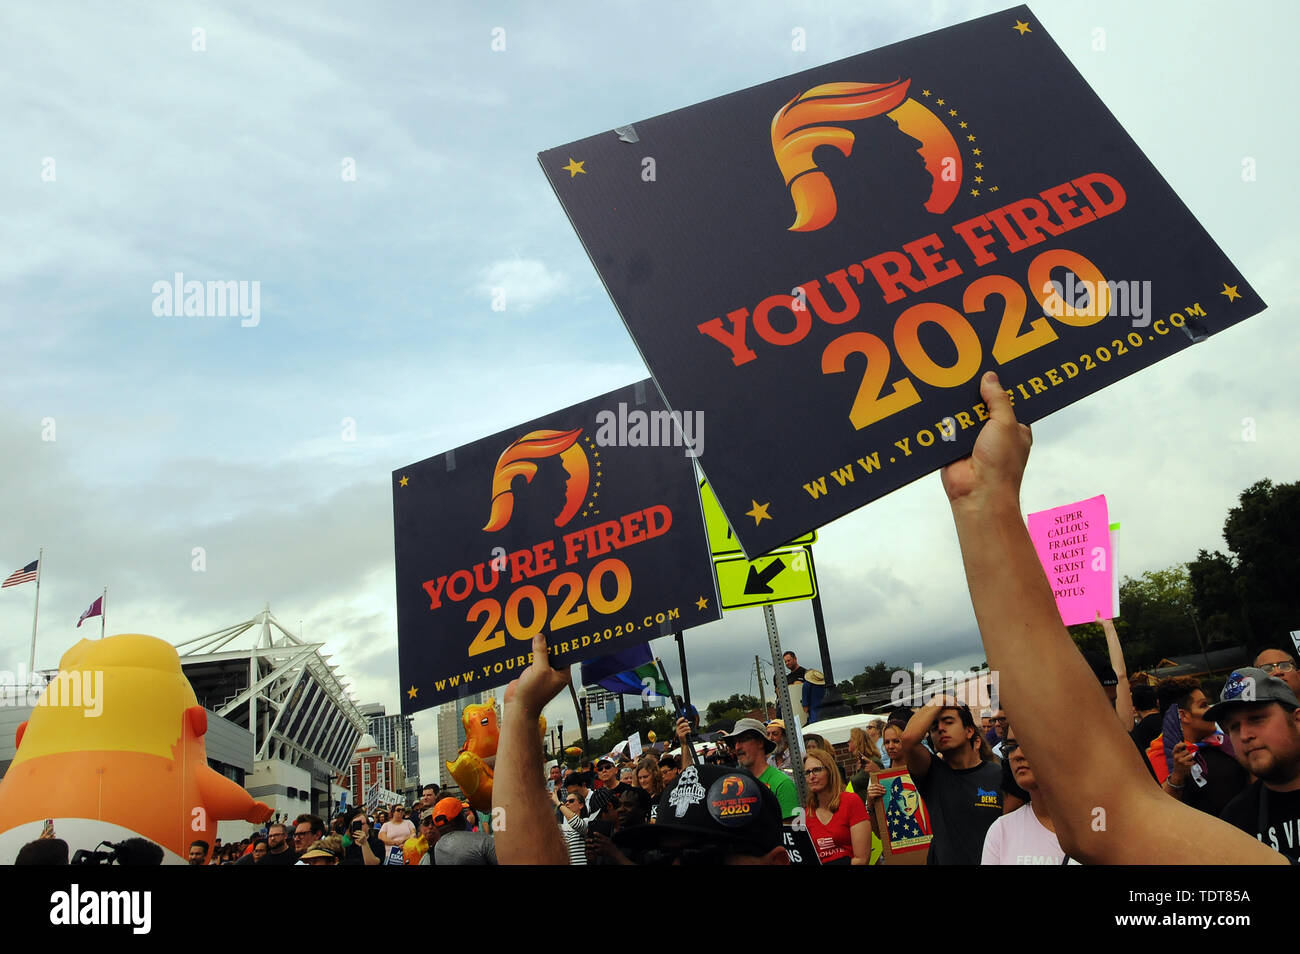 Orlando, Florida, USA. 18th June, 2019. Protesters demonstrate against U.S. President Donald Trump near the site of a Make America Great Again rally at the Amway Center on June 18, 2019 in Orlando, Florida. The rally is billed as Trump's kick-off event for his campaign for re-election in 2020. Credit: Paul Hennessy/Alamy Live News Stock Photo